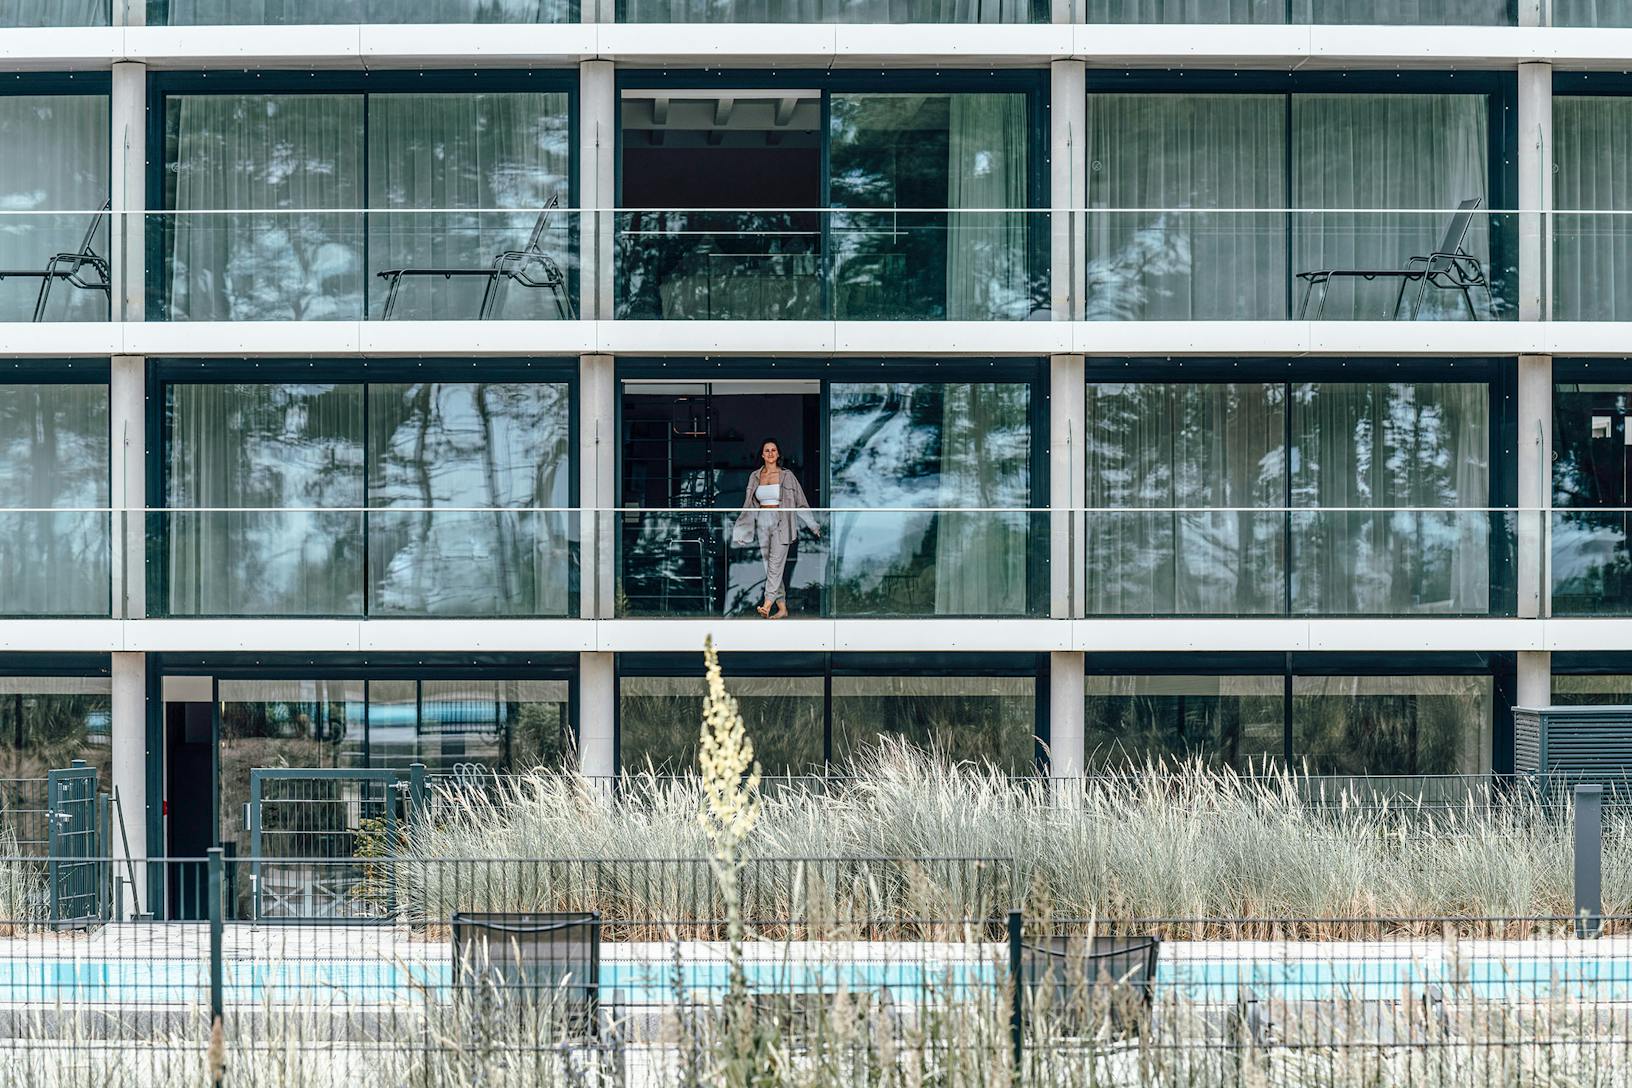 A woman enjoying the view from the glass-walled balcony of a multifamily apartment building